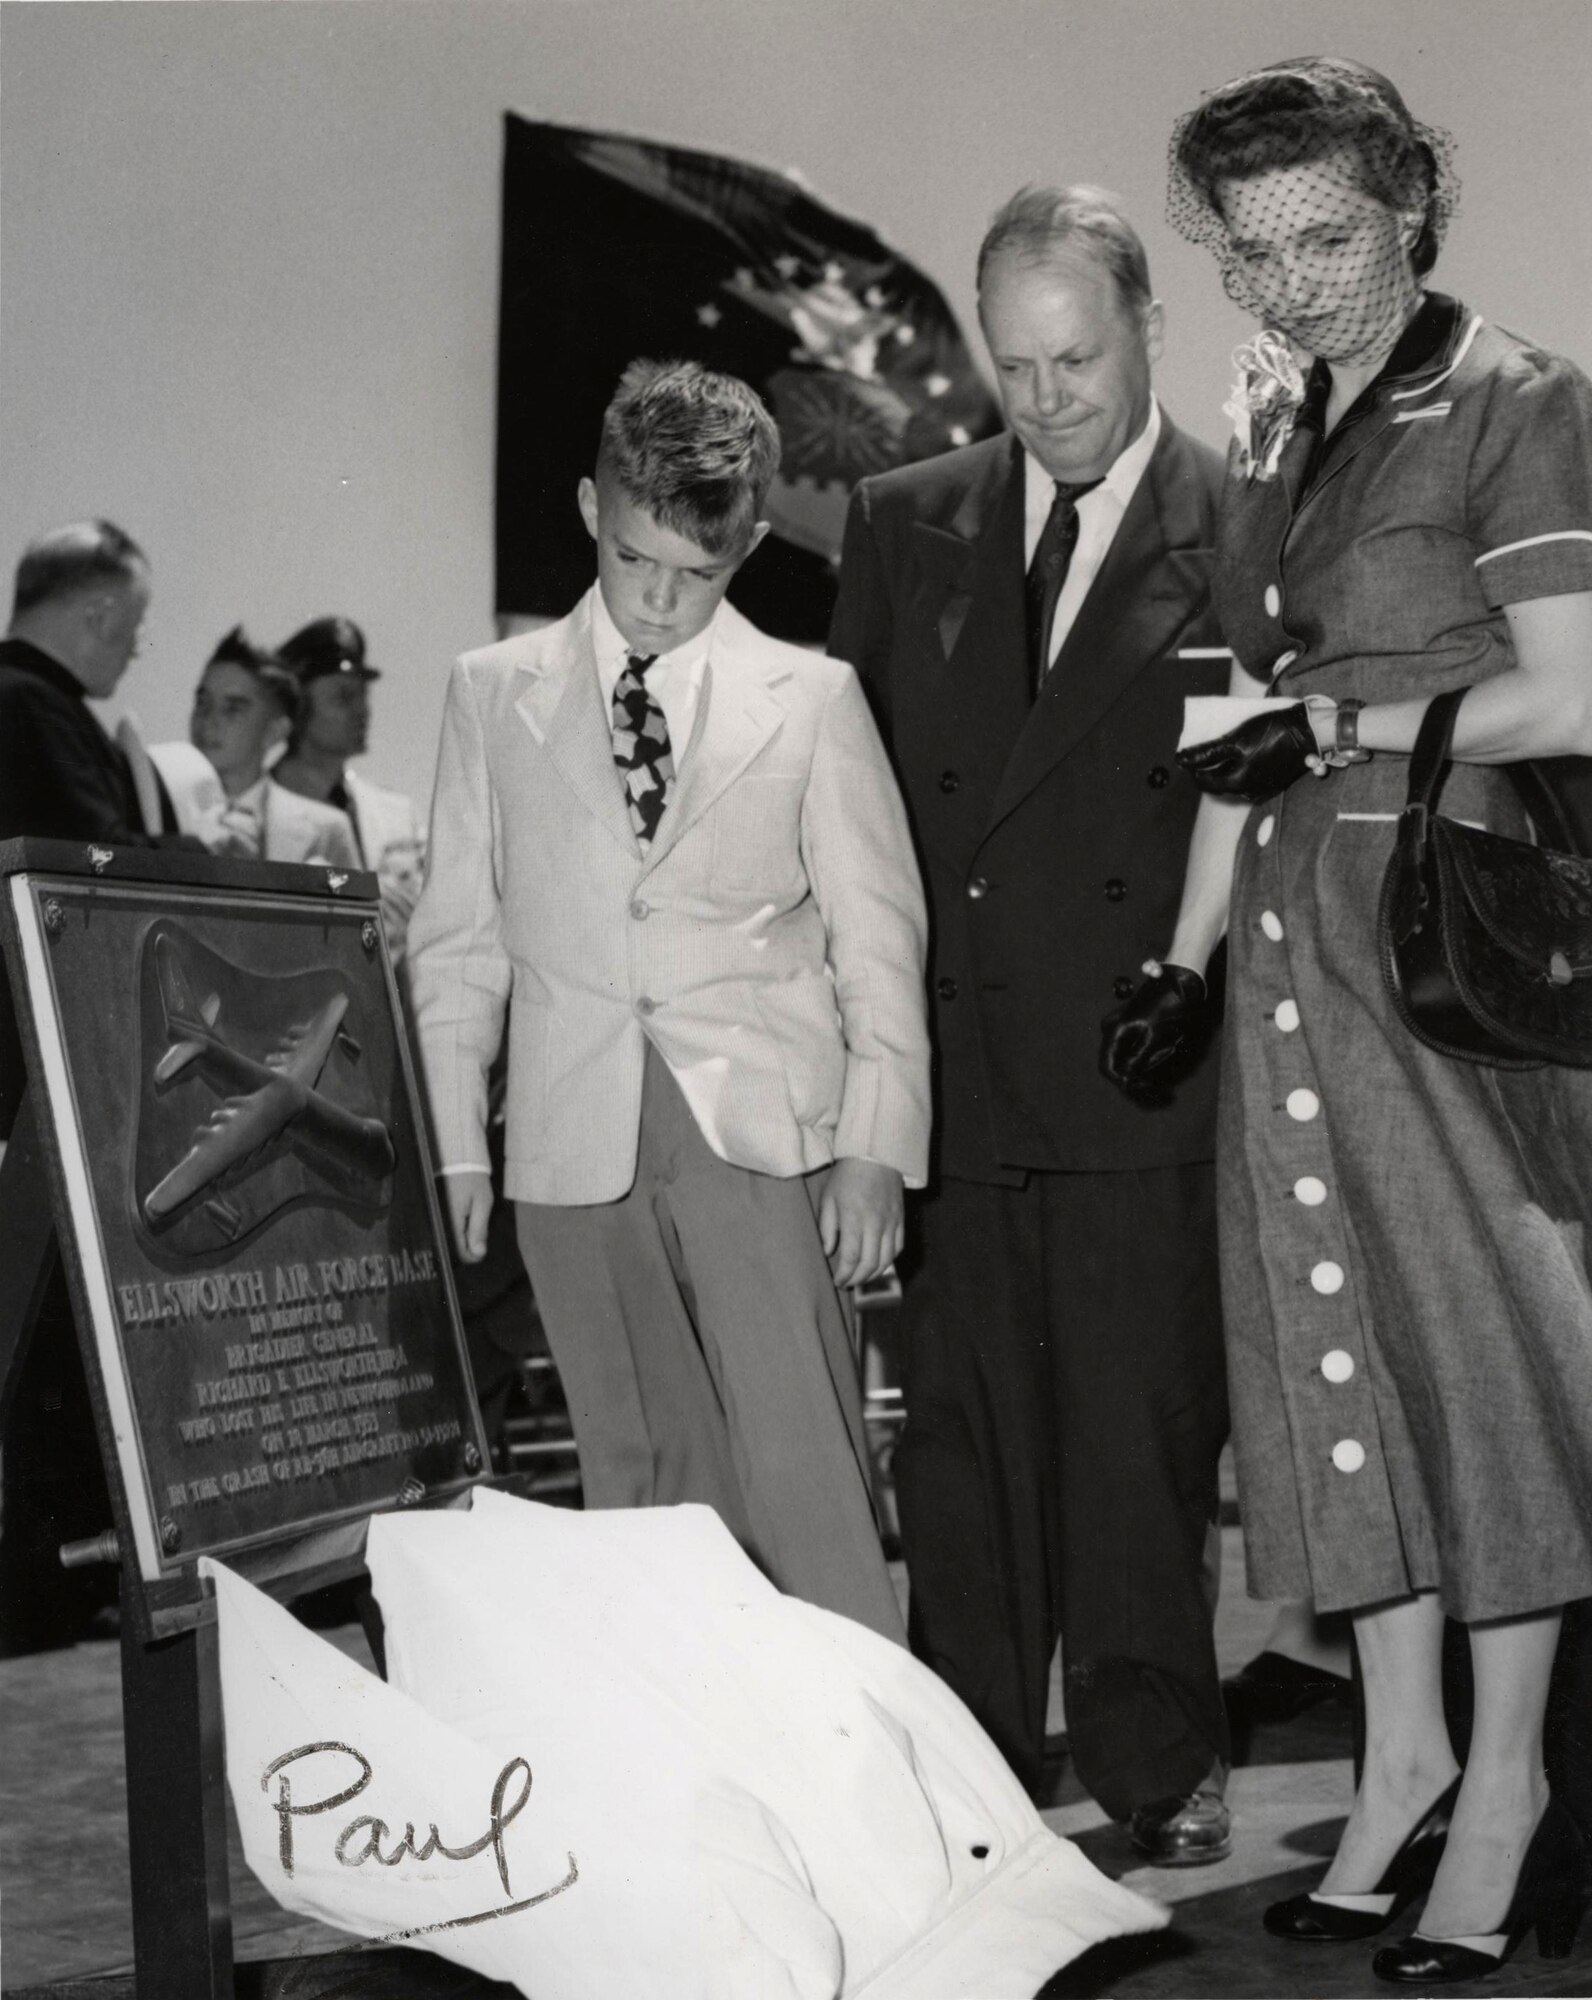 Mrs. Richard Ellsworth, Paul Ellsworth and Senator Karl E. Mundt inspect the plaque uncovered by President Dwight D. Eisenhower during a dedication ceremony renaming the base "Ellsworth Air Force Base," June 13, 1953. (Courtesy photo from South Dakota Air and Space Museum)